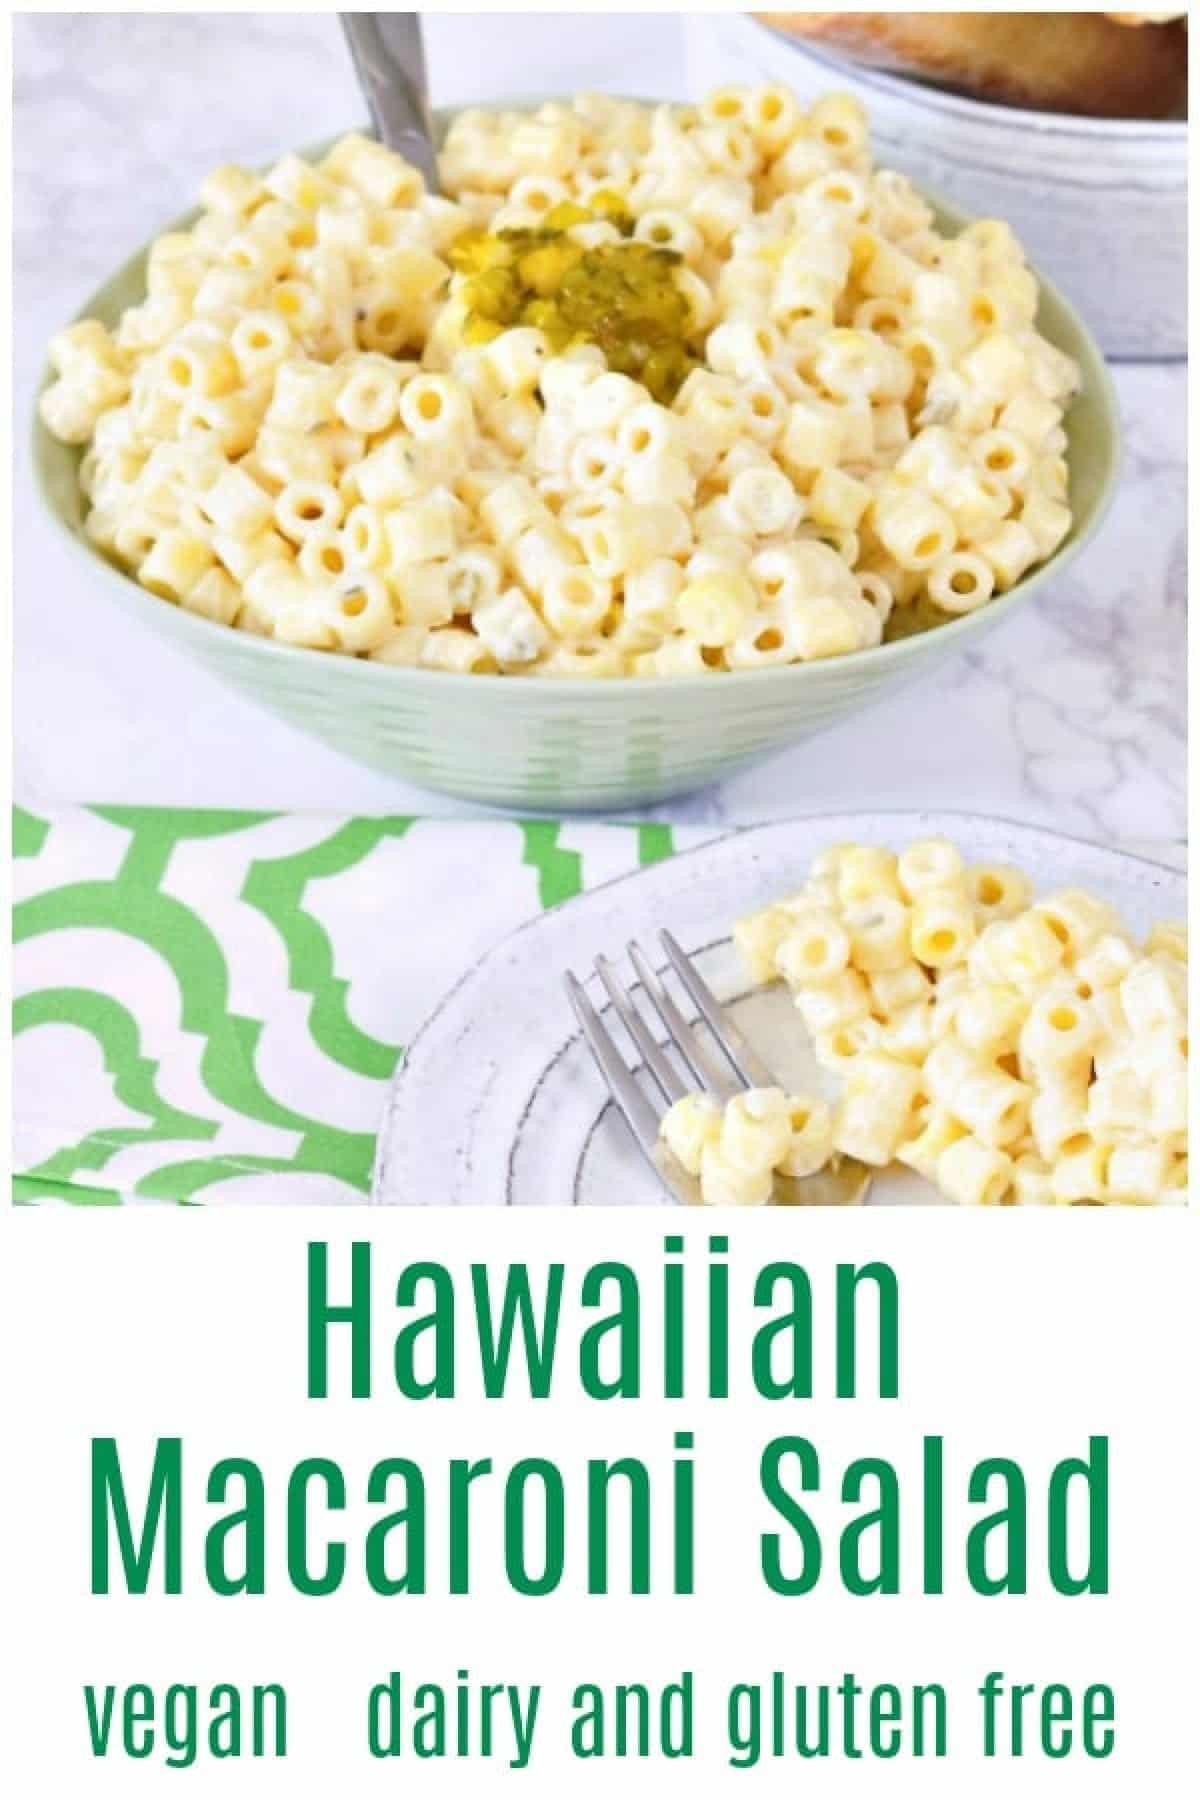 Hawaiian mac salad in a green serving bowl, with a smaller plate of mac salad on the side.